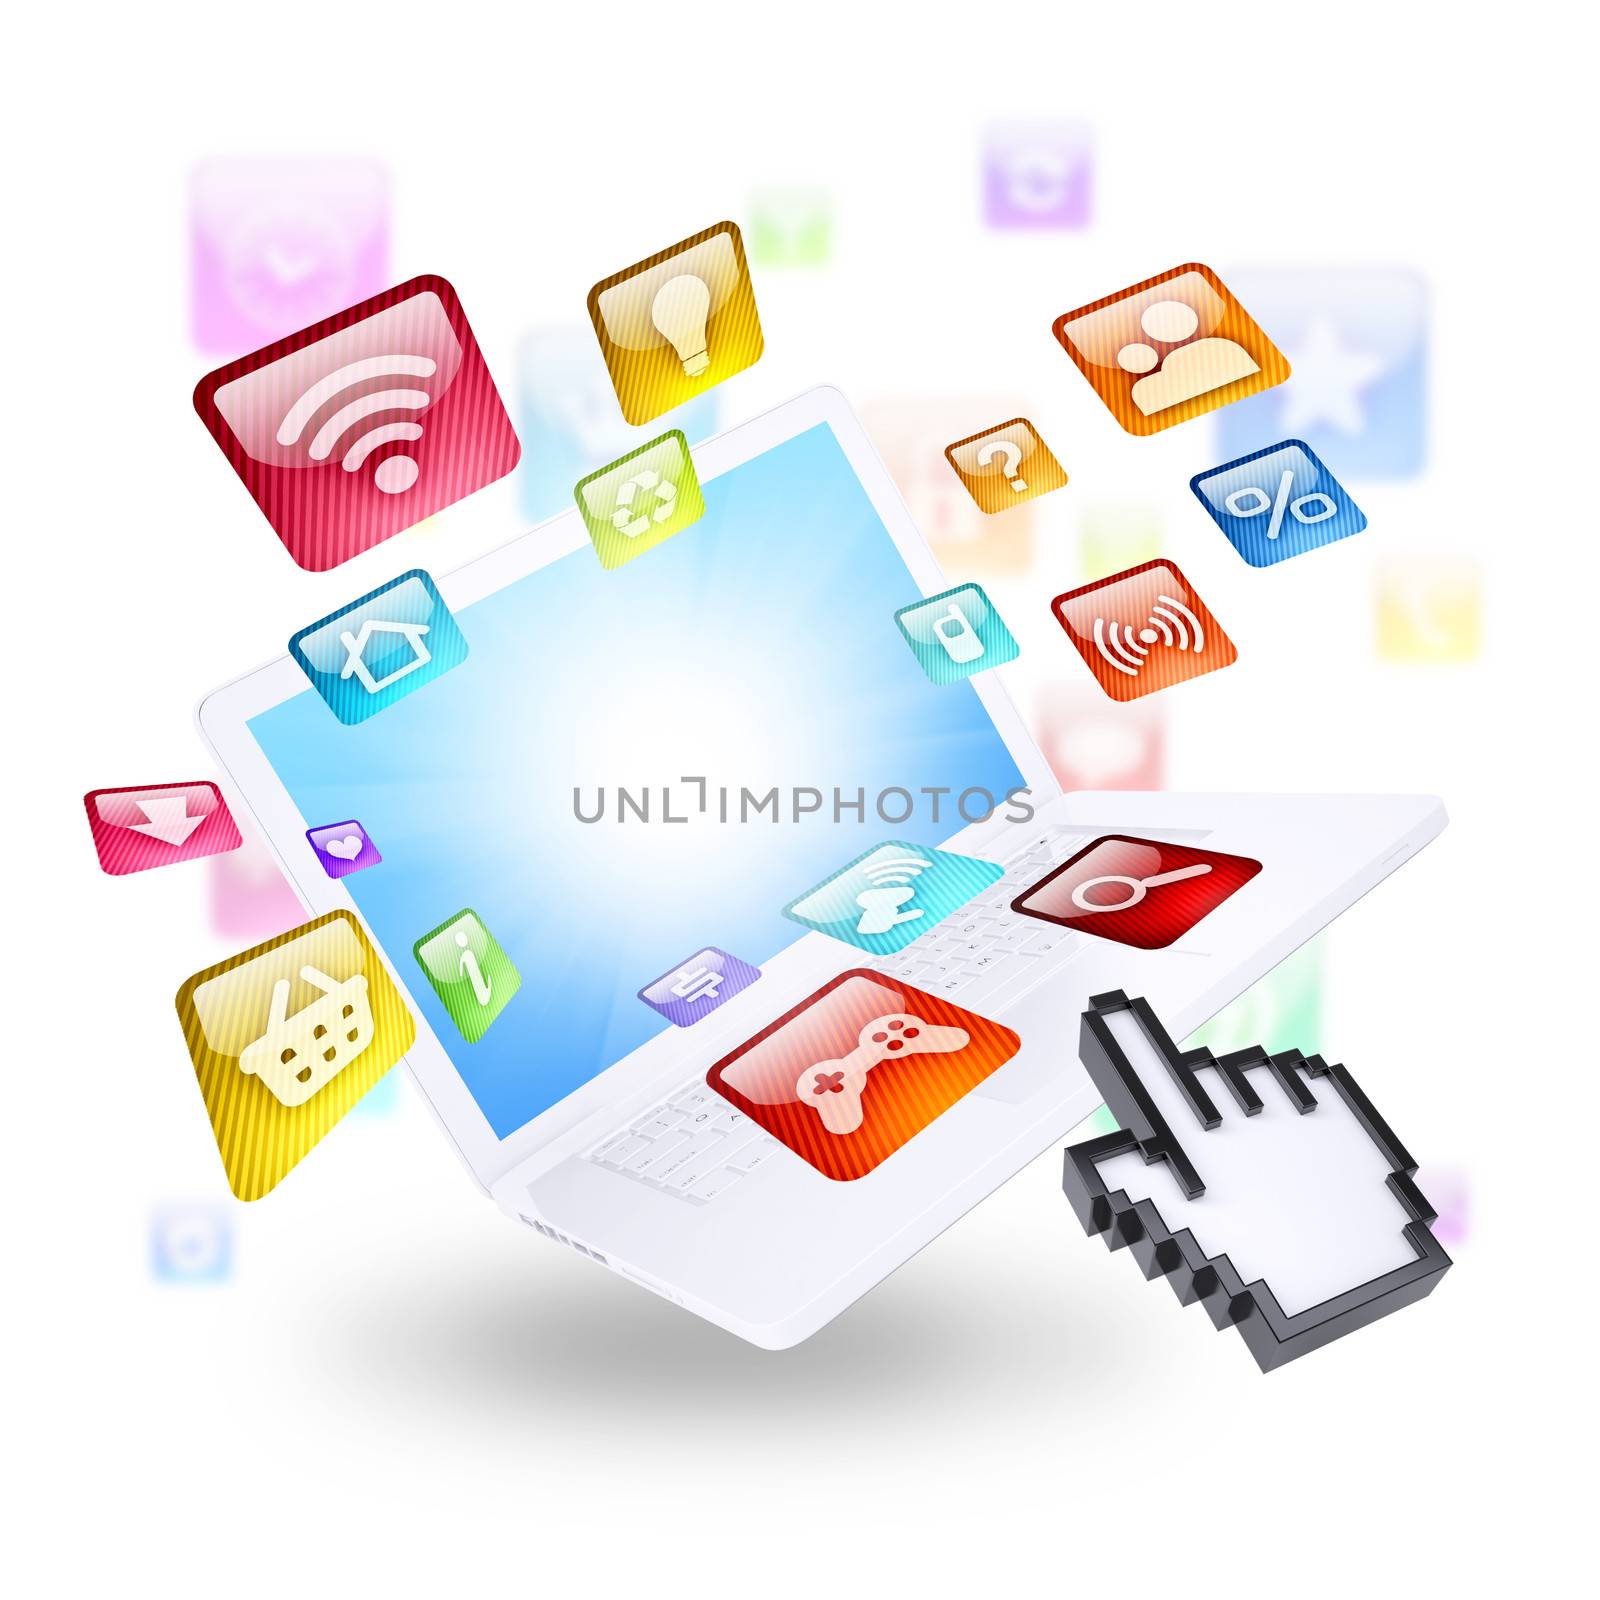 Laptop and application icons. Computer technology concept